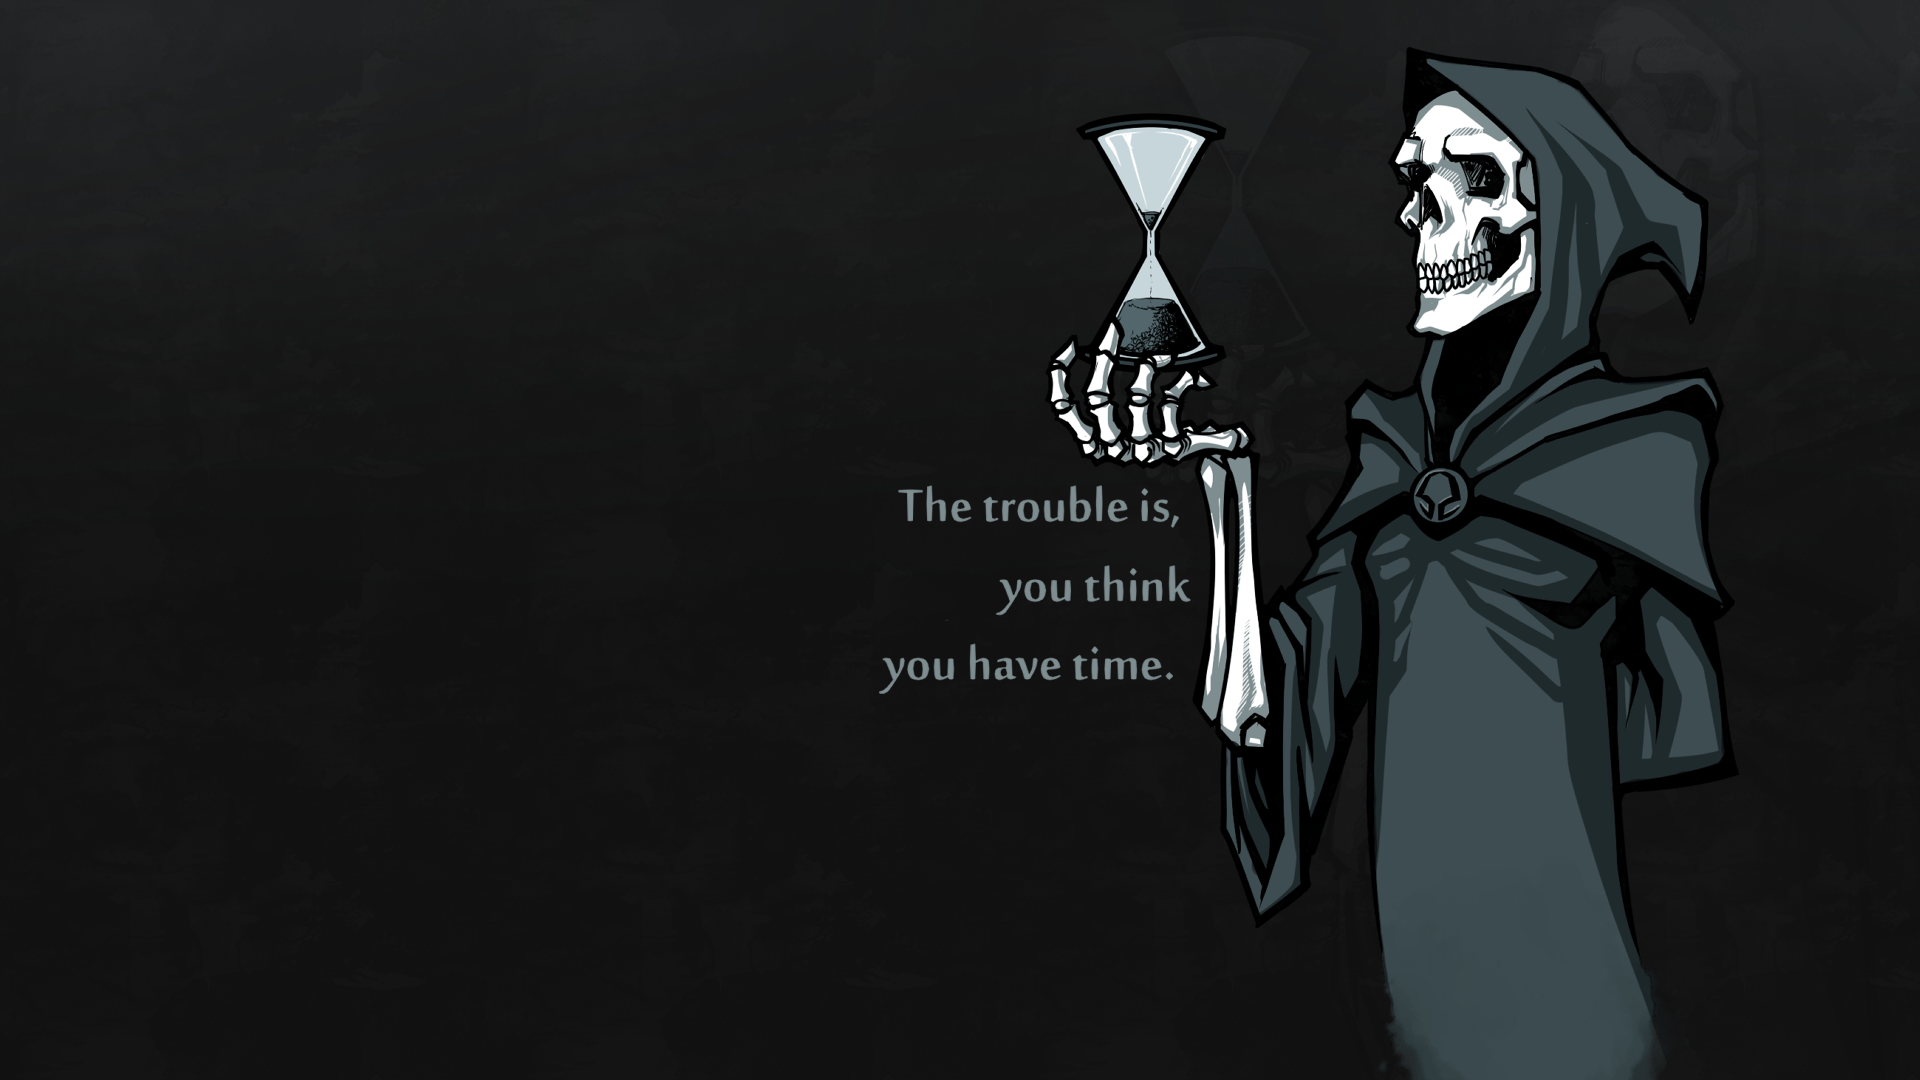 Download the Death Hourglass Wallpaper, Death Hourglass iPhone